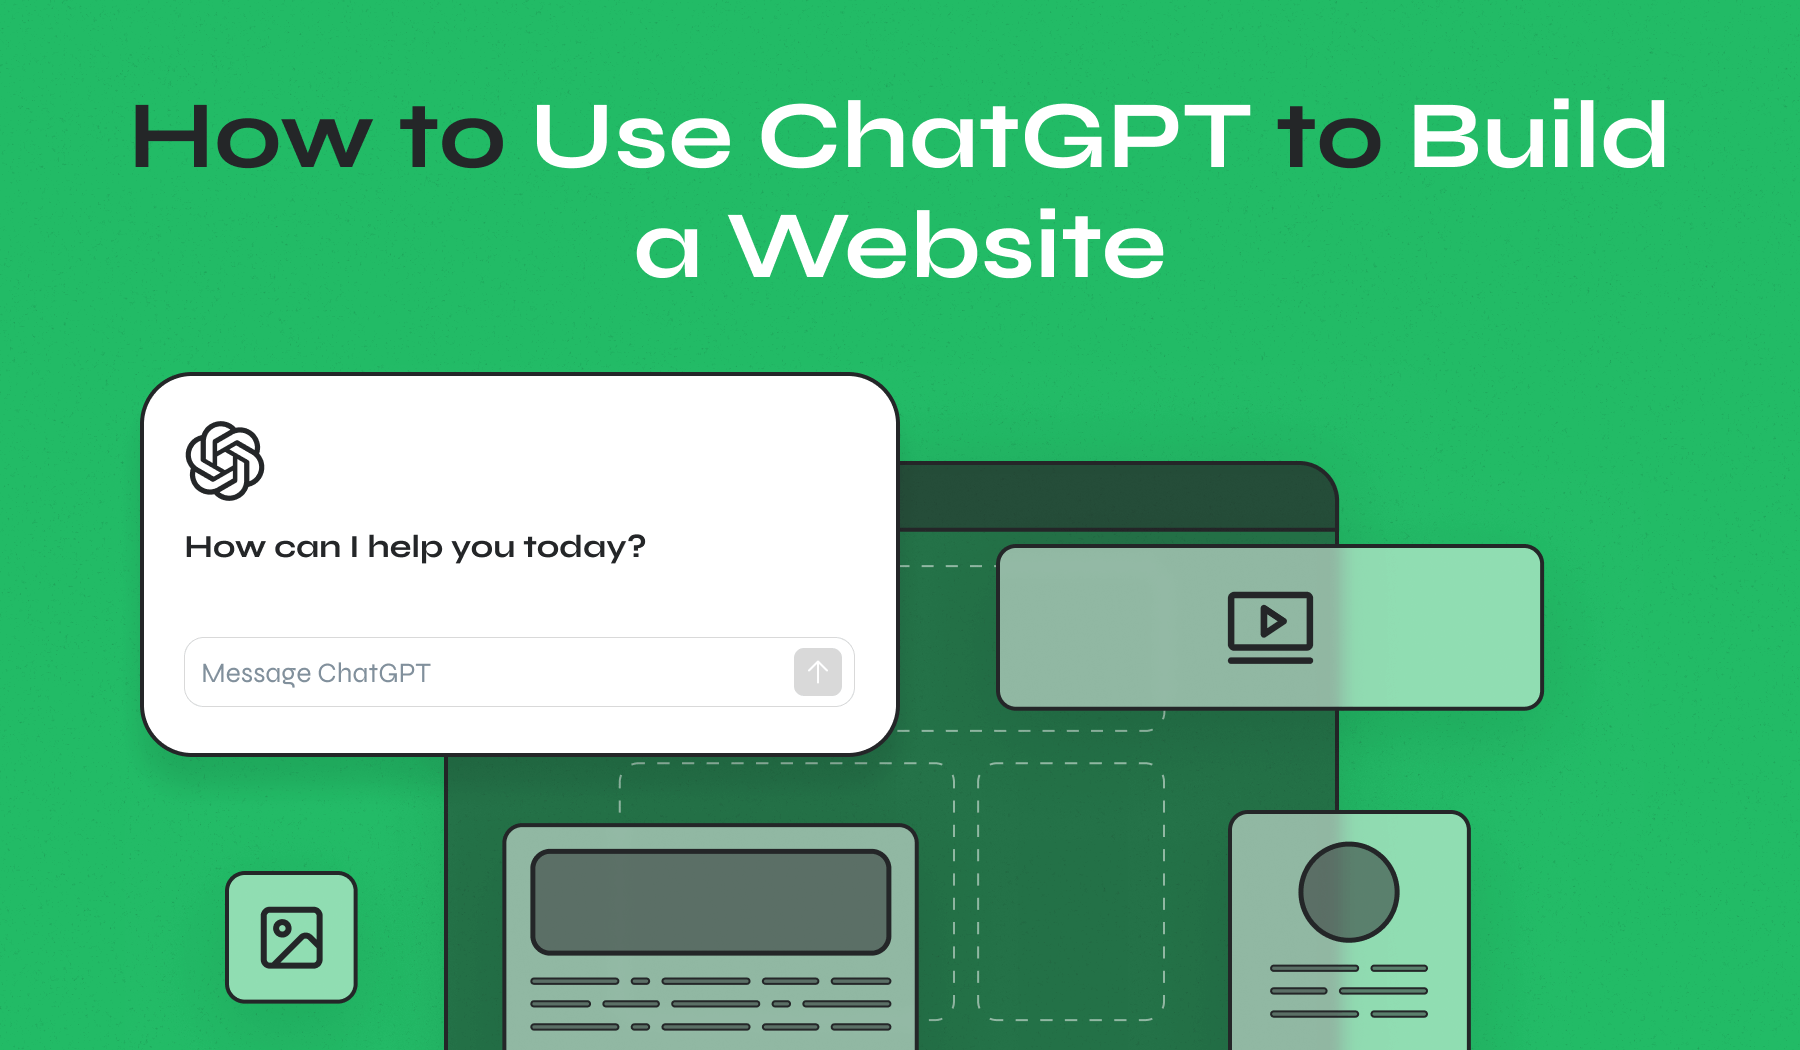 How to Build a Website with ChatGPT